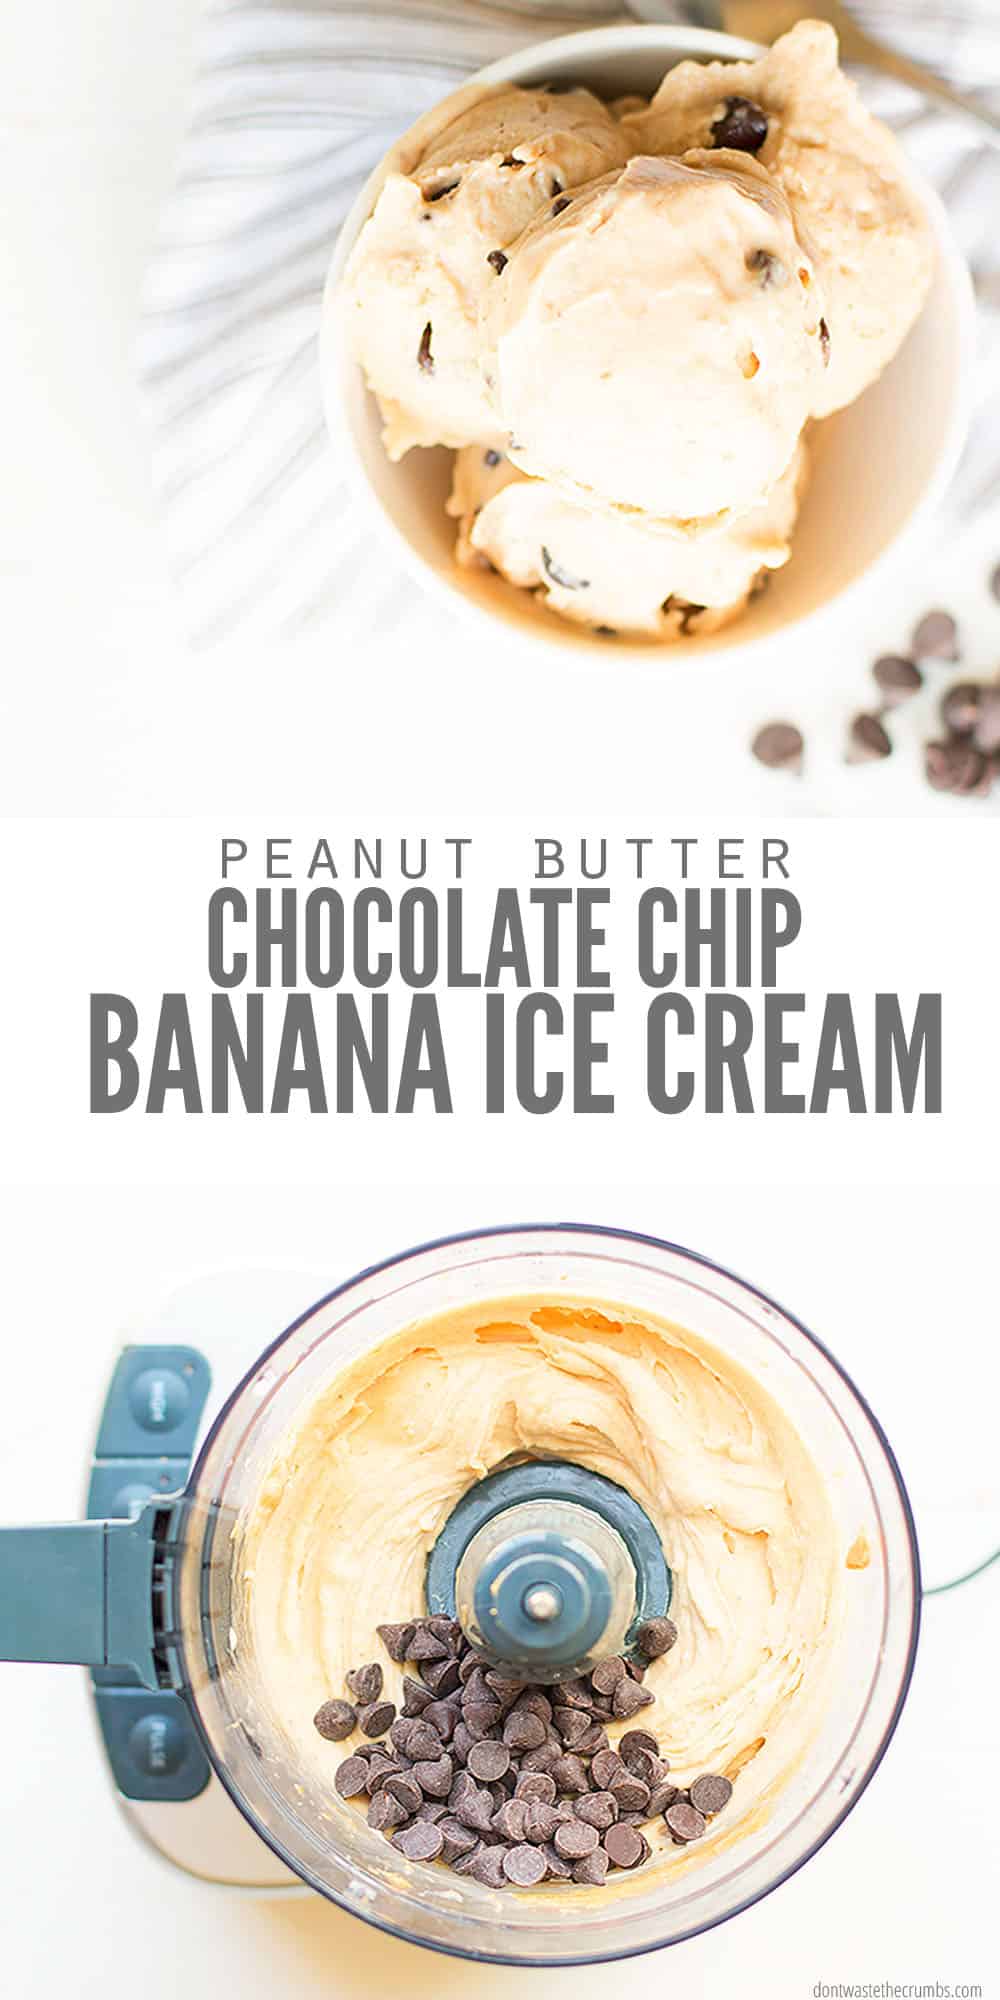 Homemade peanut butter chocolate chip banana ice cream recipe uses just one ingredient and a Vitamix or Cuisinart, no ice cream maker! (several flavors)